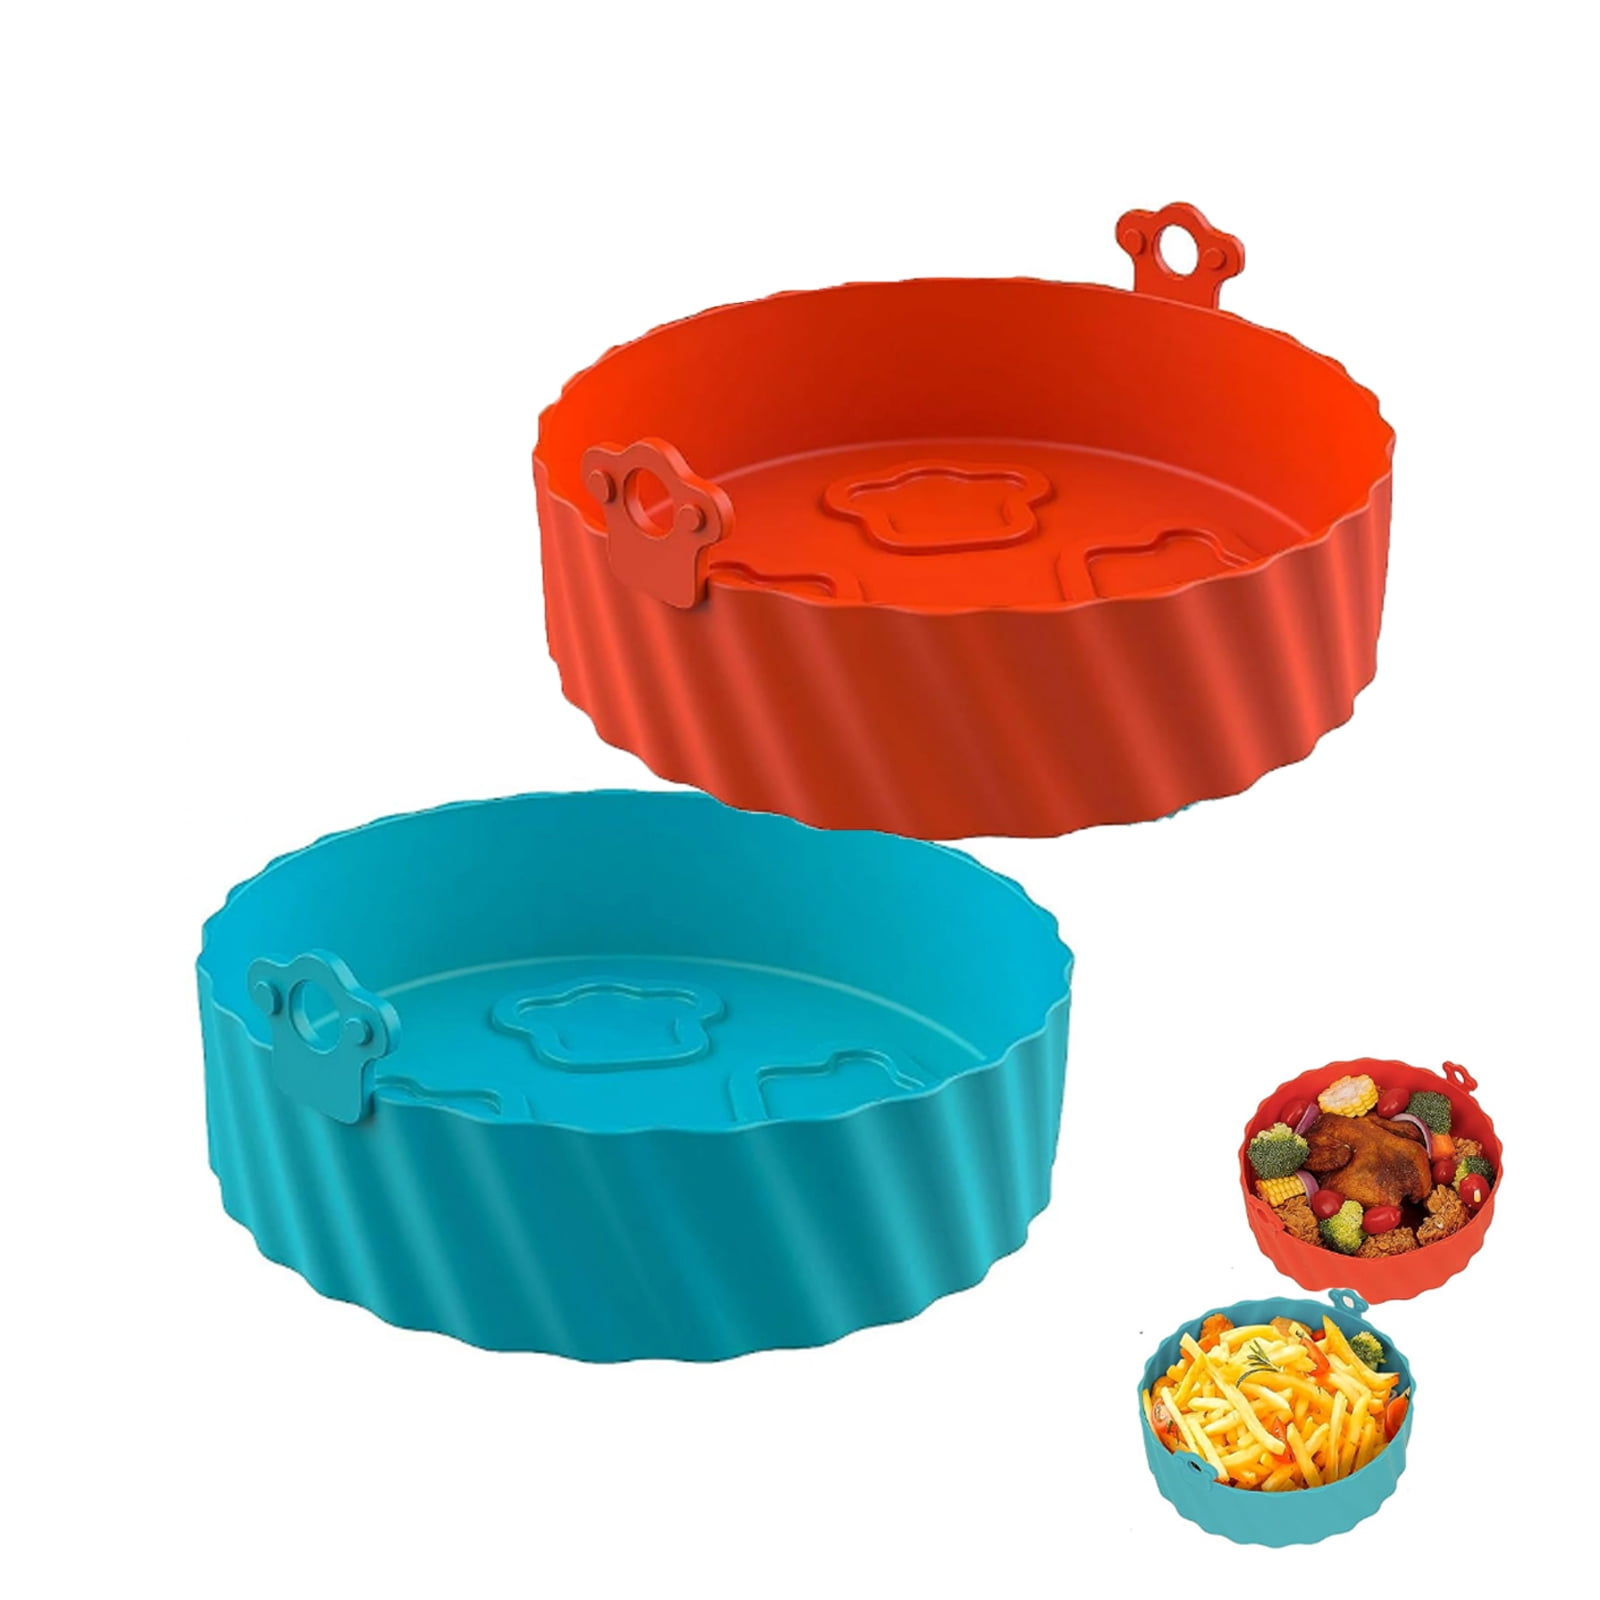 Tohuu Silicone Non-Stick Silicone Baking Tray High Temperature Silicone  Bowl No More Harsh Cleaning Basket After Using eco friendly 